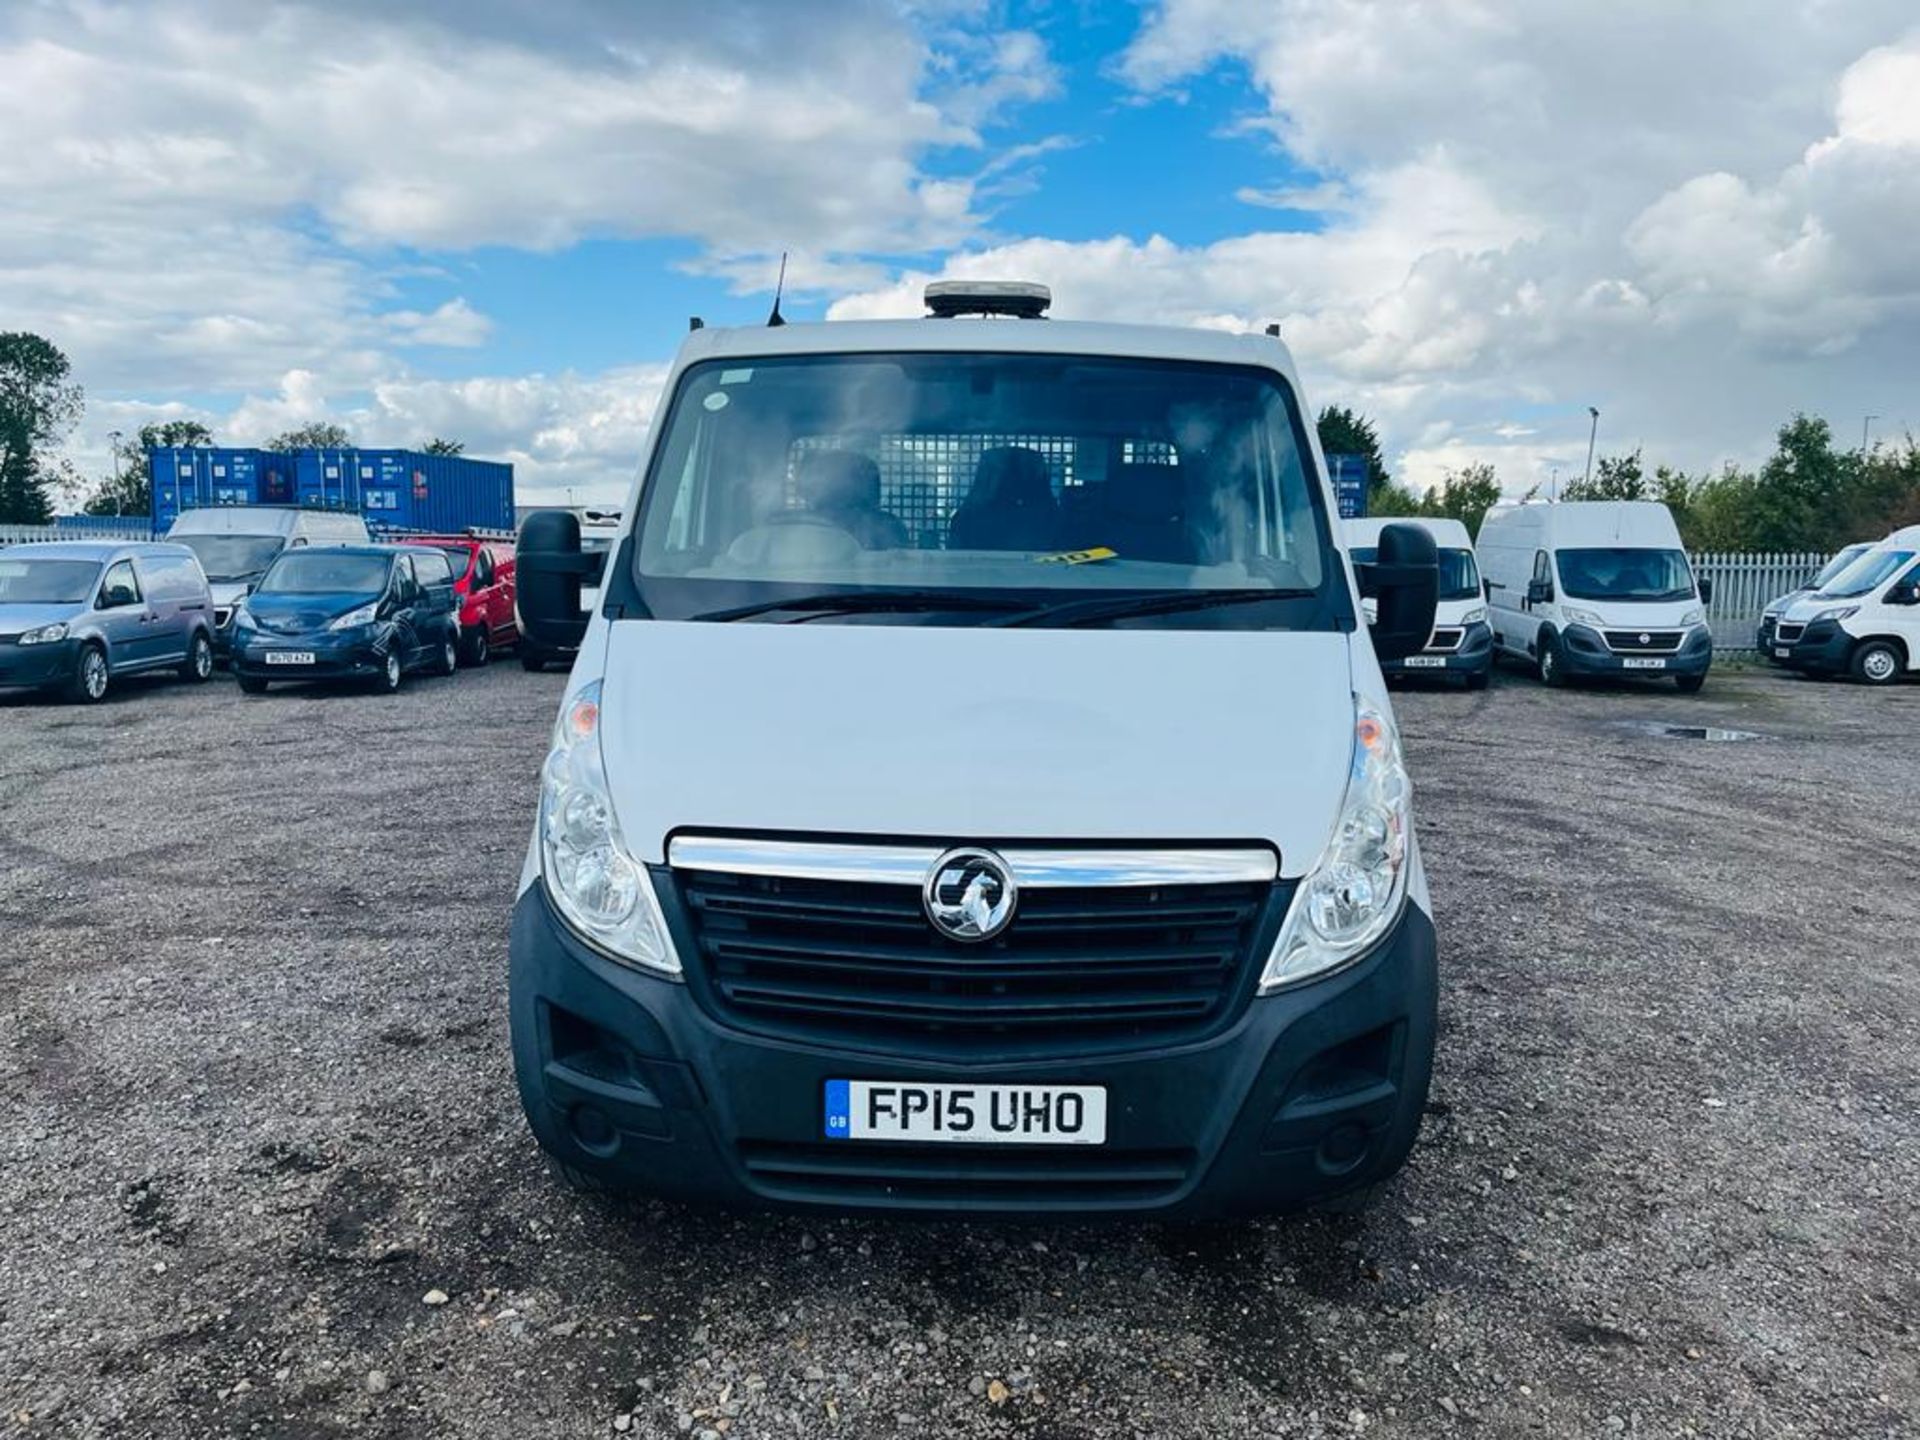 ** ON SALE ** Vauxhall Movano 2.3 CDTI RWD TRW R3500 2015 '15 Reg' Tipper - Only 110,779 Miles - Image 3 of 29